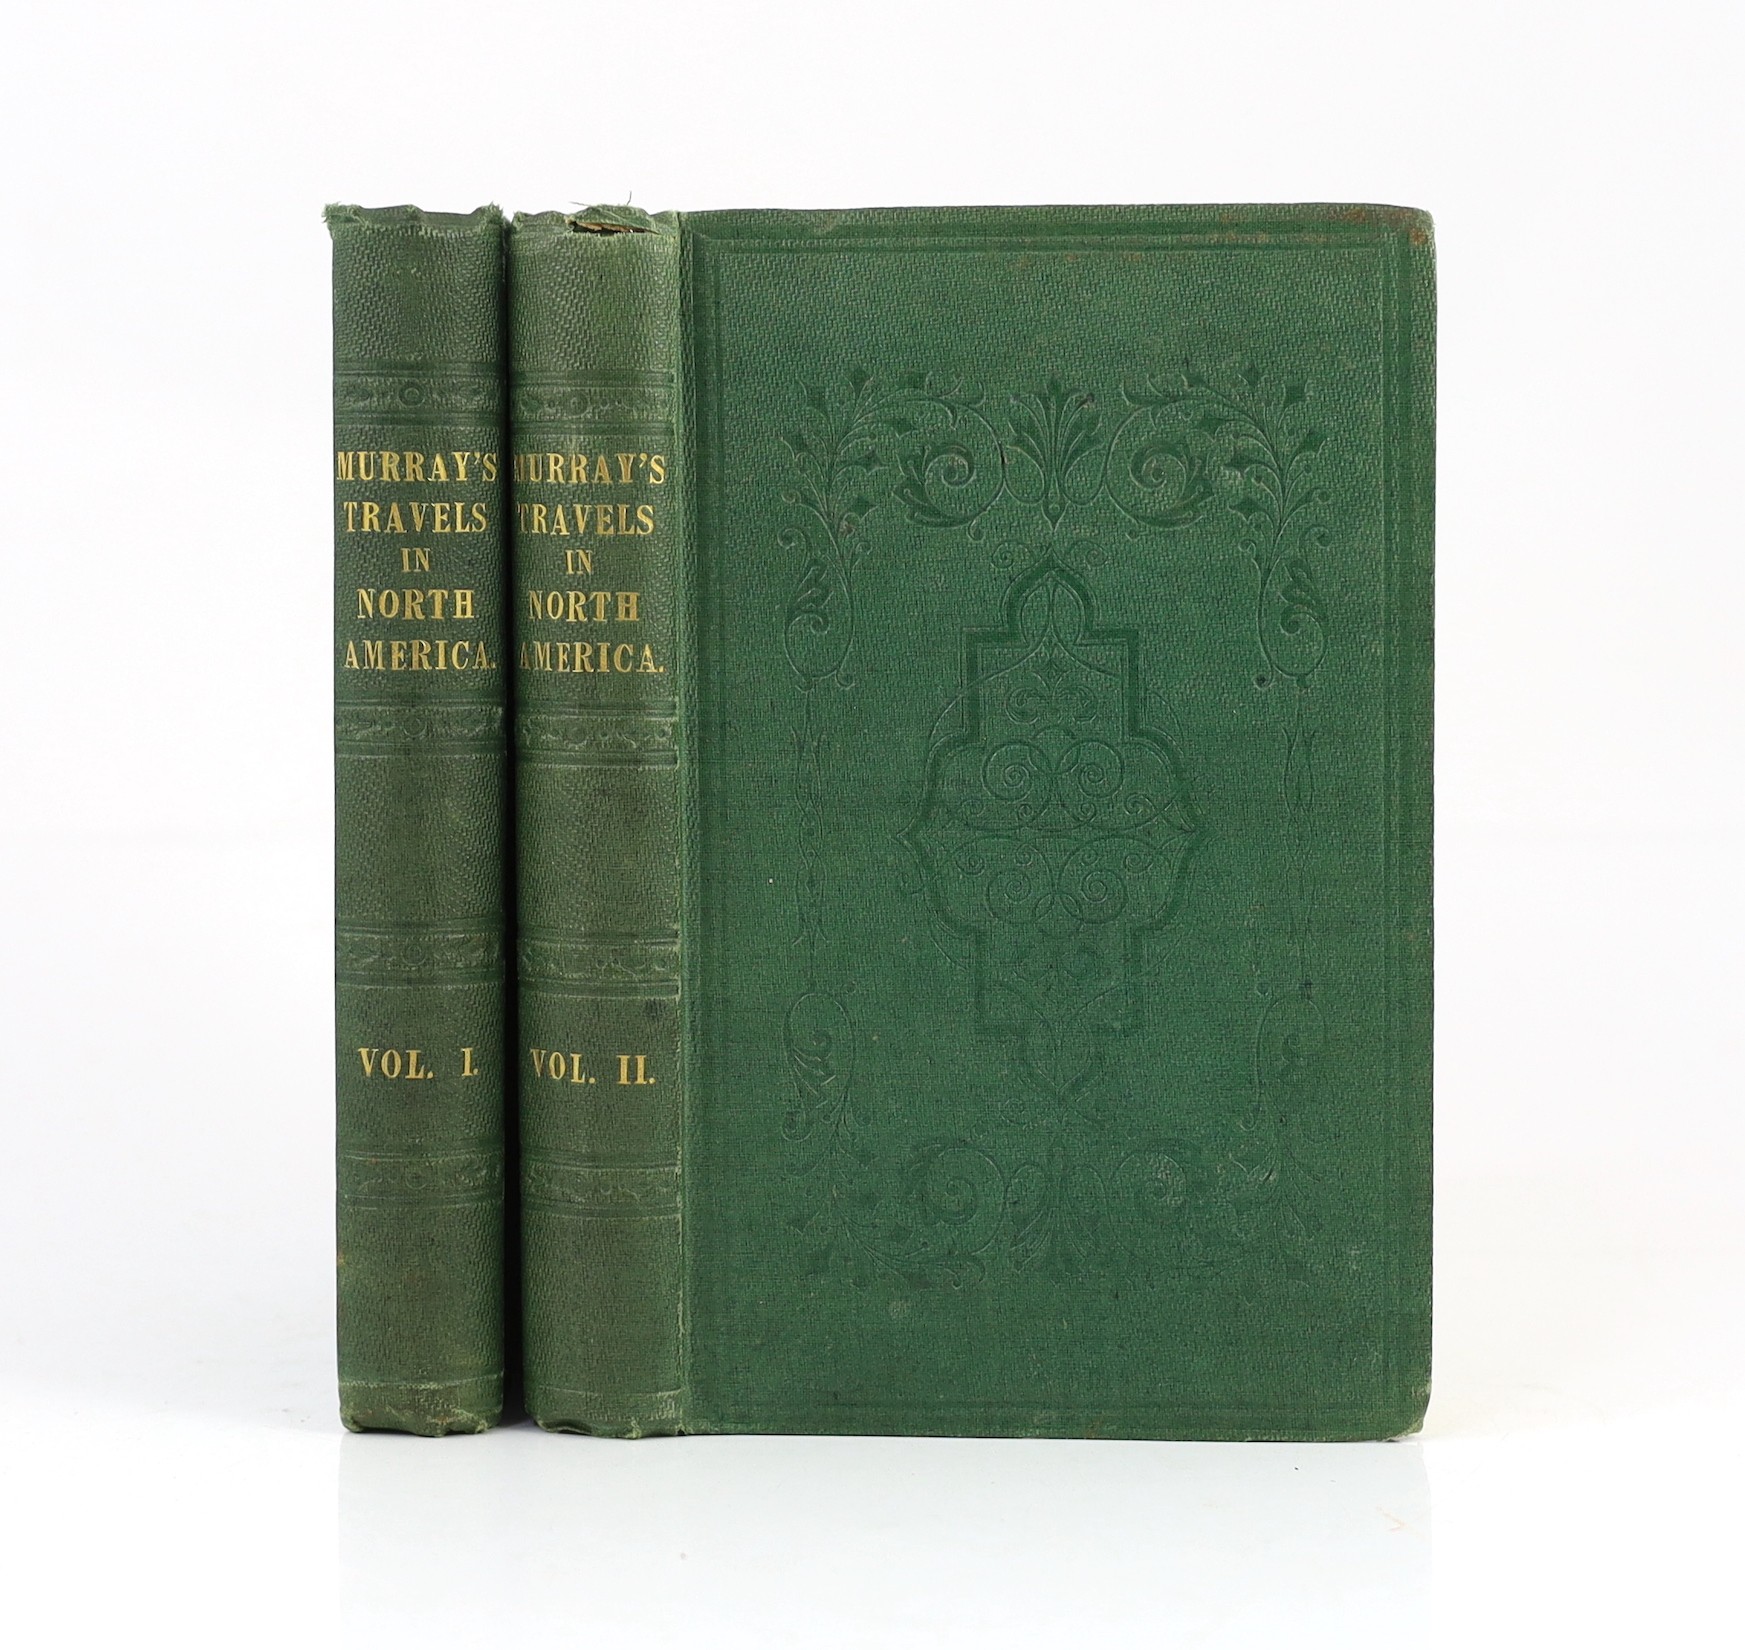 Murray, Charles Augustus - Travels in North America, including a summer residence with the Pawnee Tribe of Indians ... 3rd edition, revised (etc.), 2 vols, publisher's blind-decorated and gilt lettered cloth, partly unop